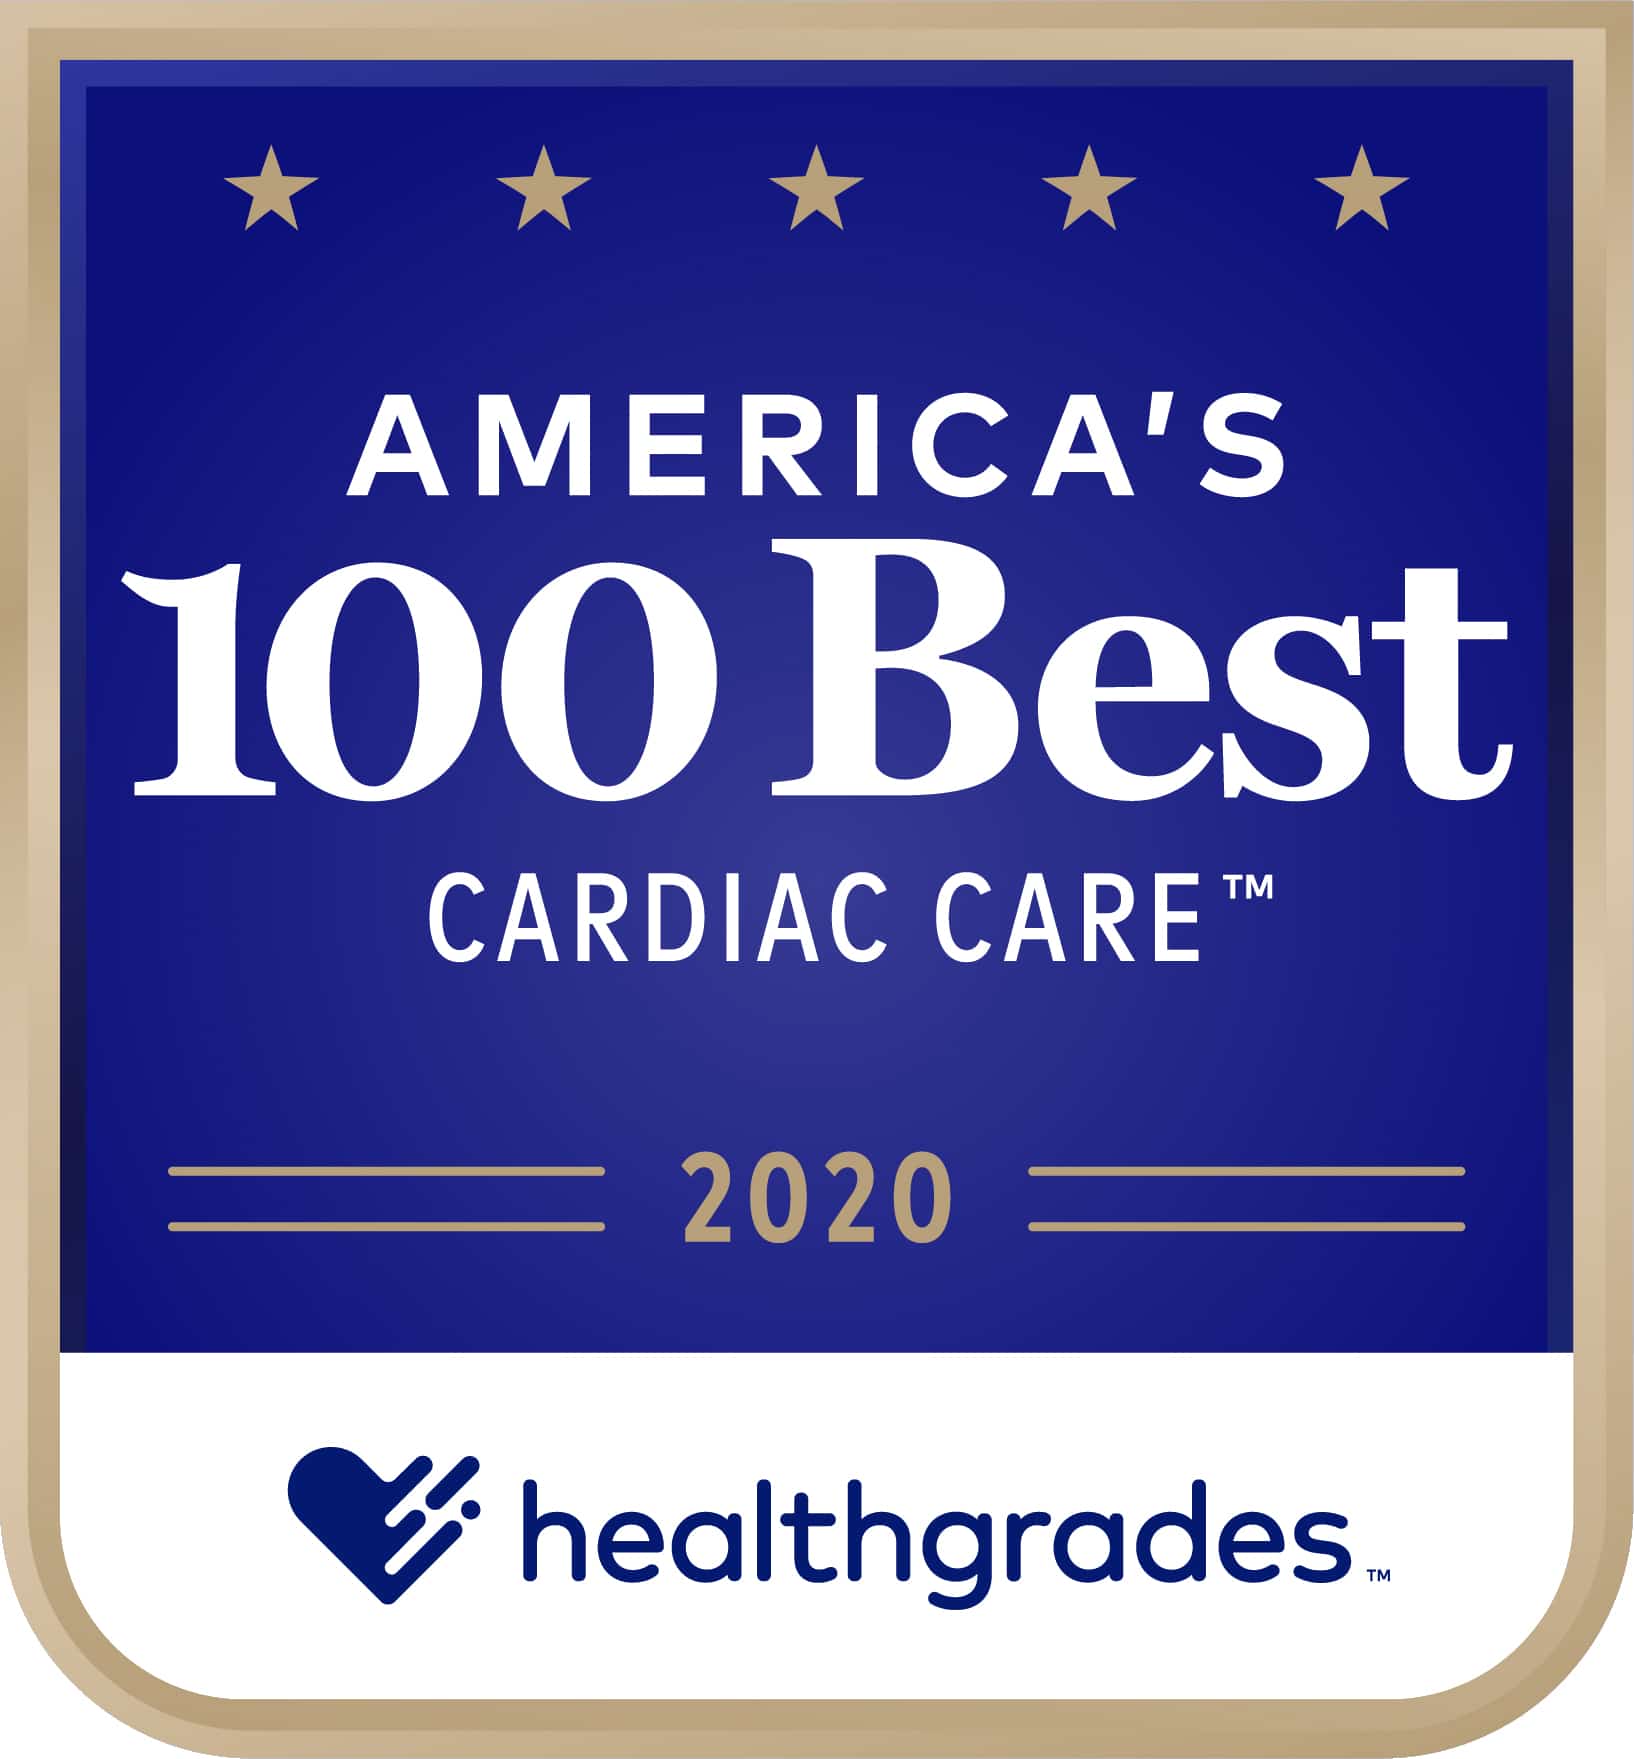 Huntington Hospital named America’s 100 Best for Cardiac Care and 100 Best for Coronary Intervention